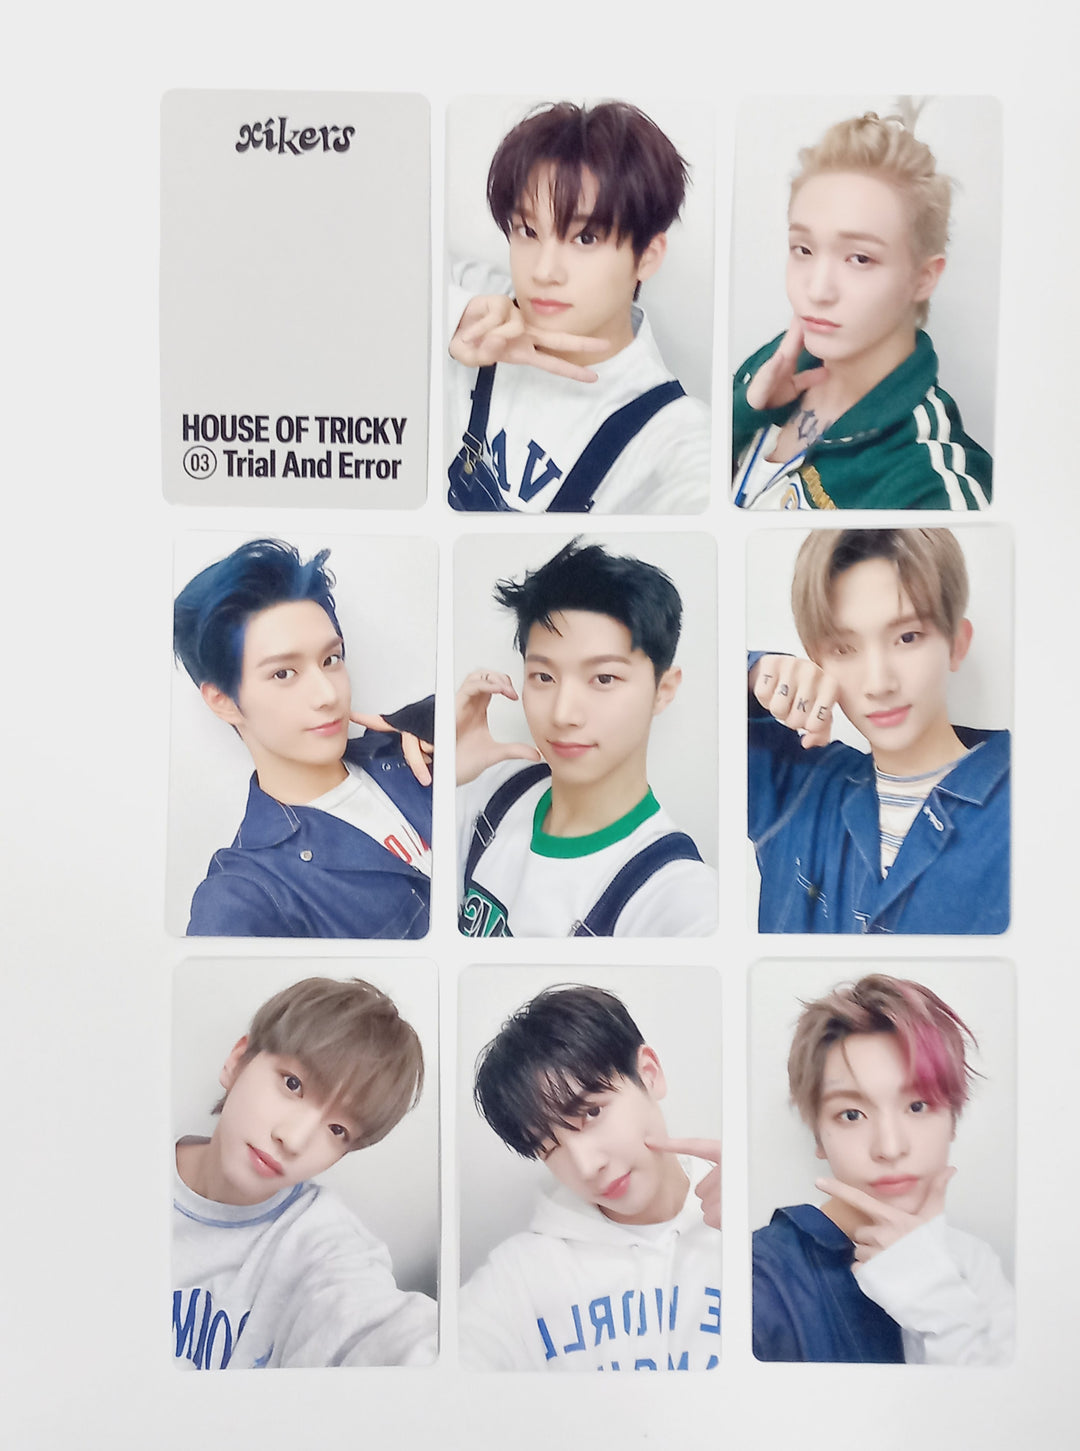 Xikers "HOUSE OF TRICKY : Trial And Error" - Music Art Pre-Order Benefit Photocard [24.3.20]